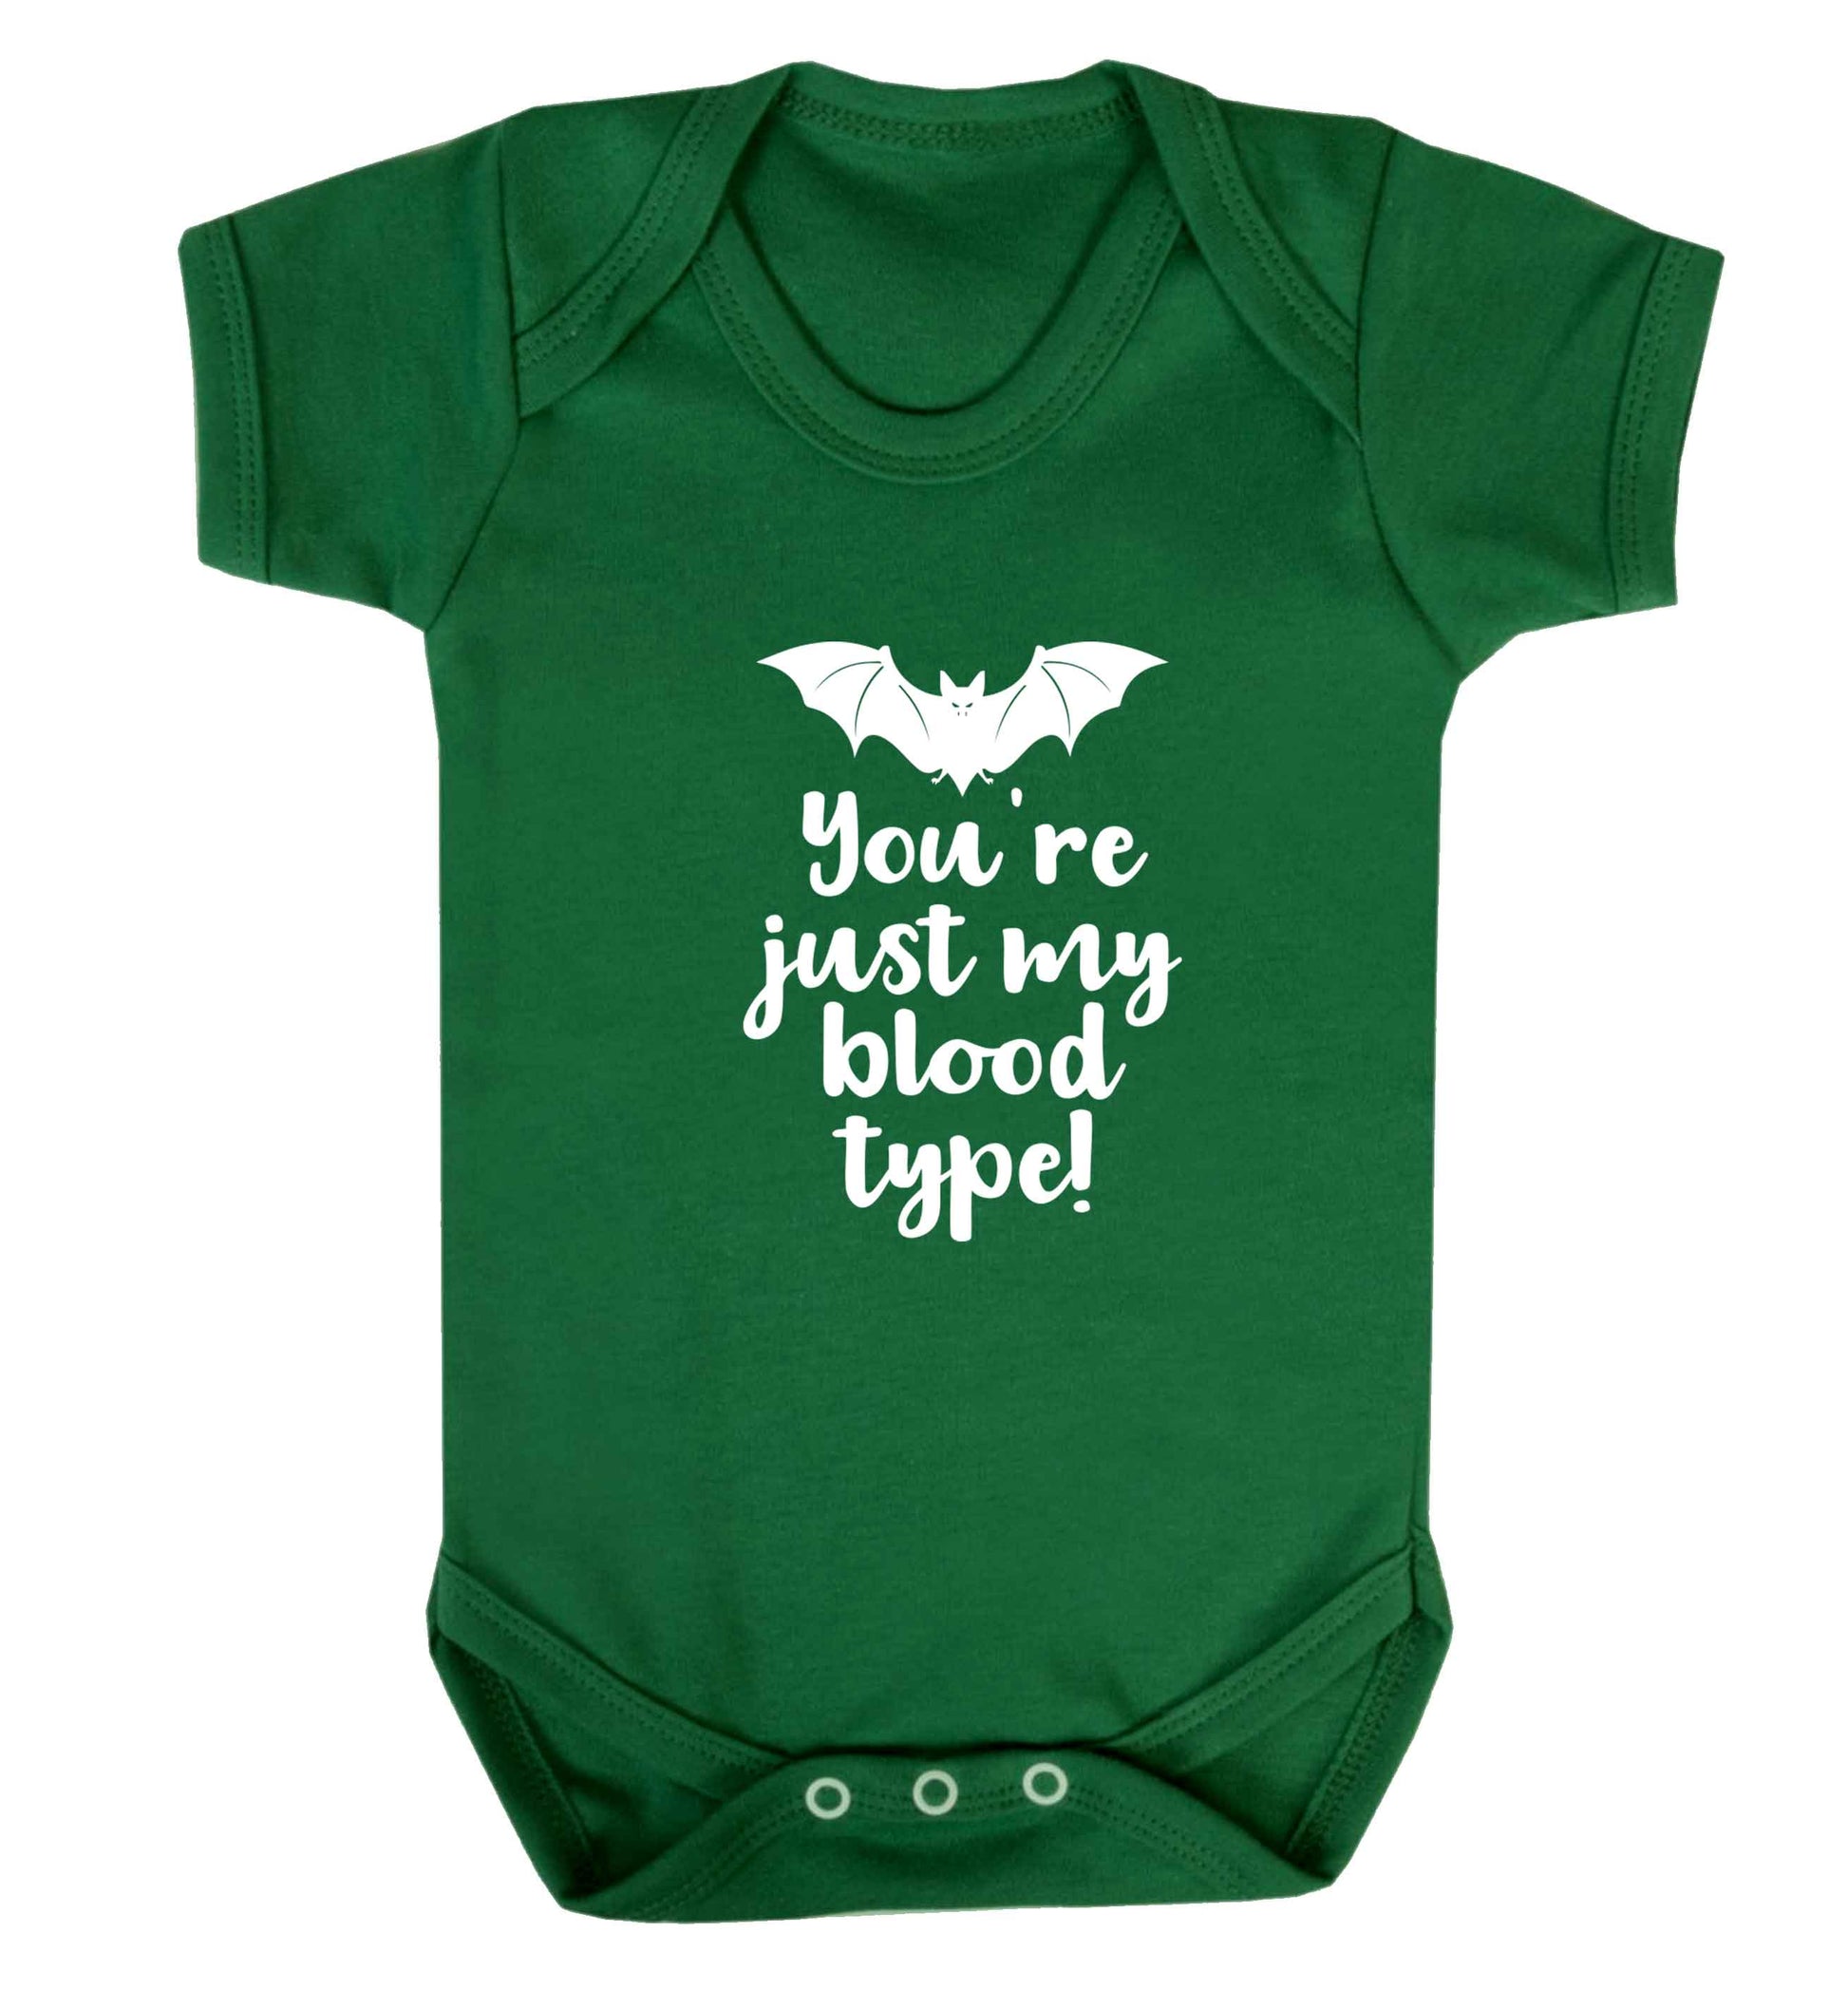 You're just my blood type baby vest green 18-24 months